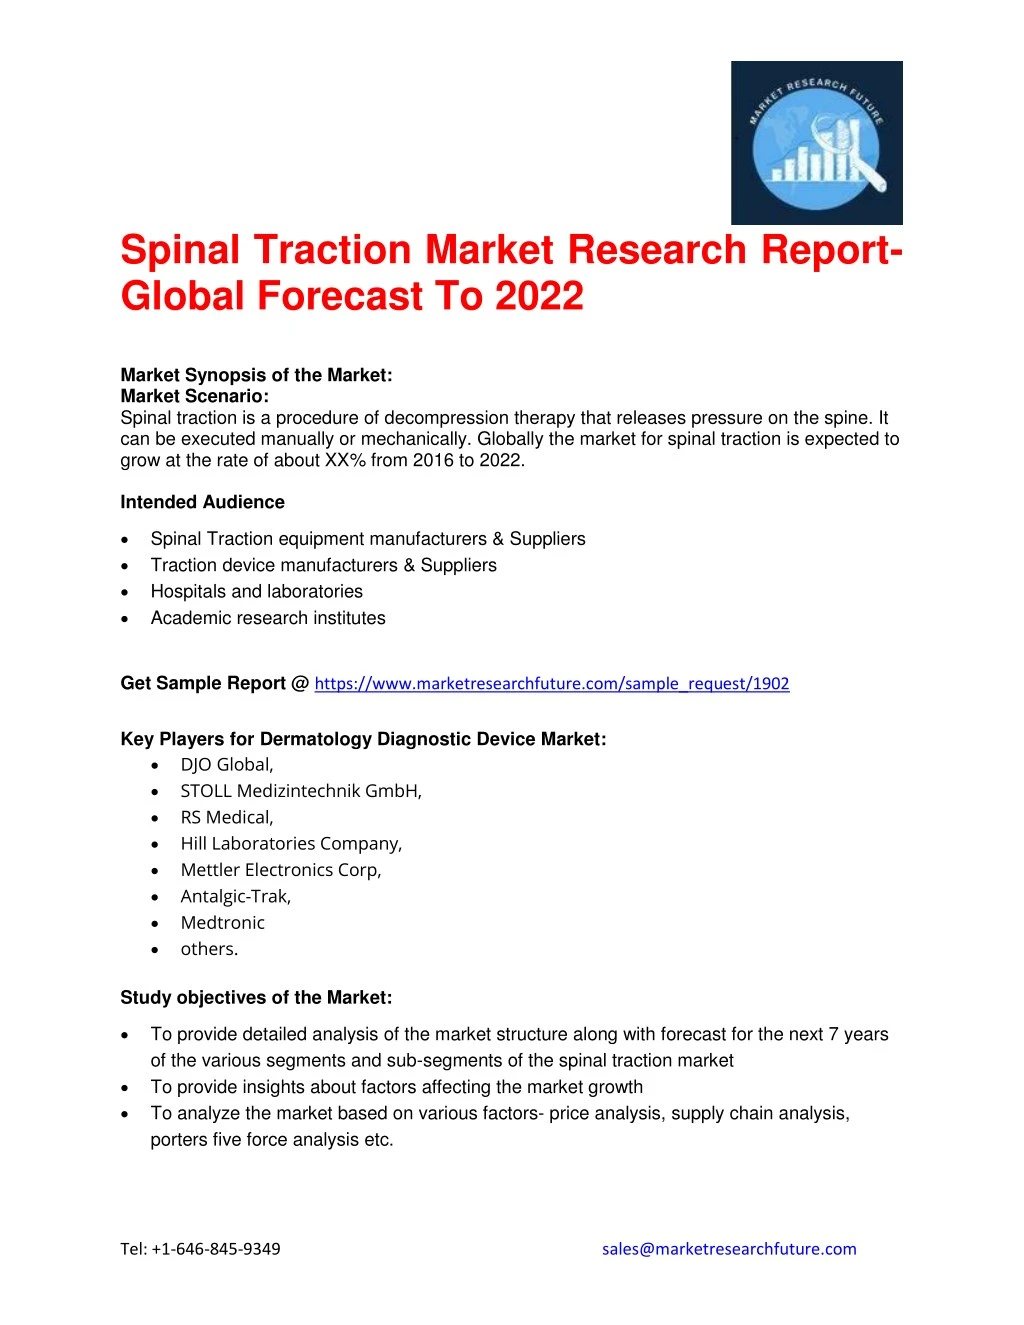 spinal traction market research report global